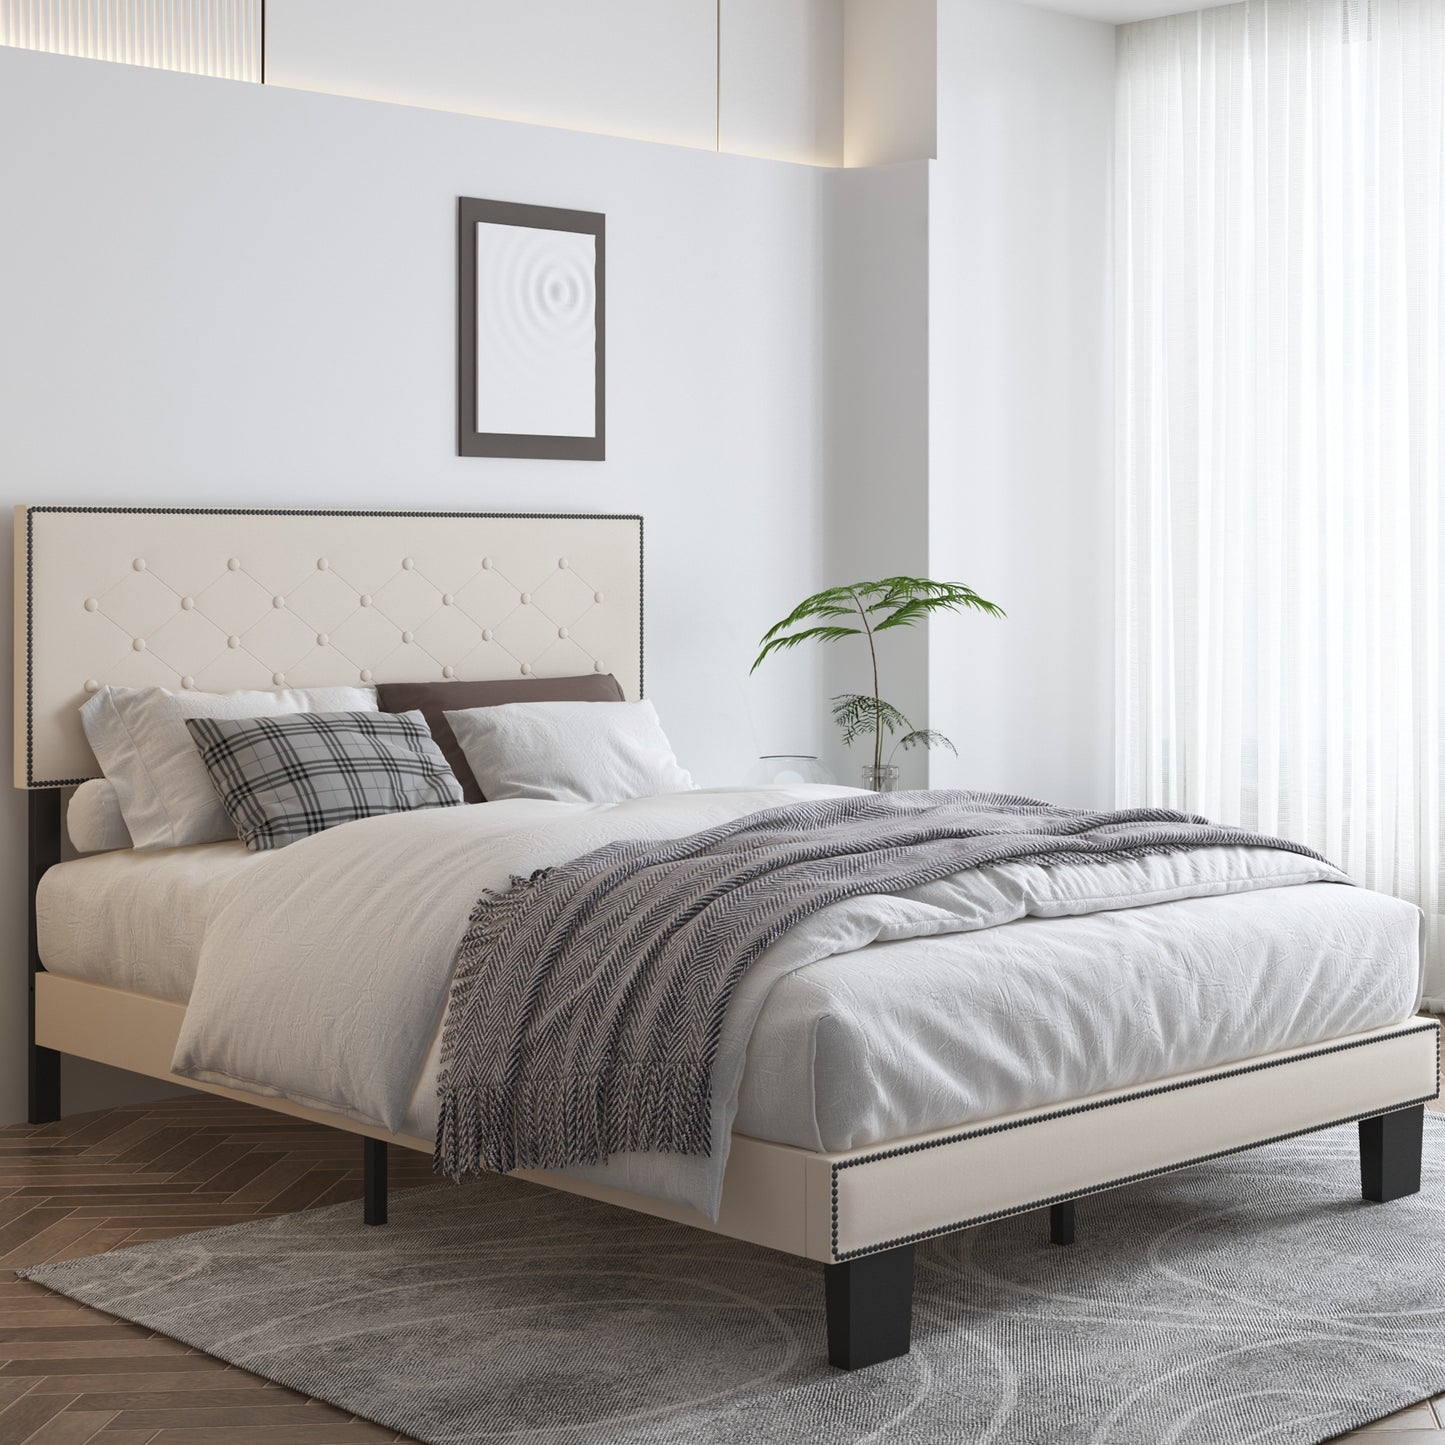 SYNGAR Upholstered Full Platform Bed Frame Height Adjustable, Full Size Storage Bed with Button Tufted Headboard, Metal Mattress Foundation with Strong Slats, No Box Spring Needed, Beige